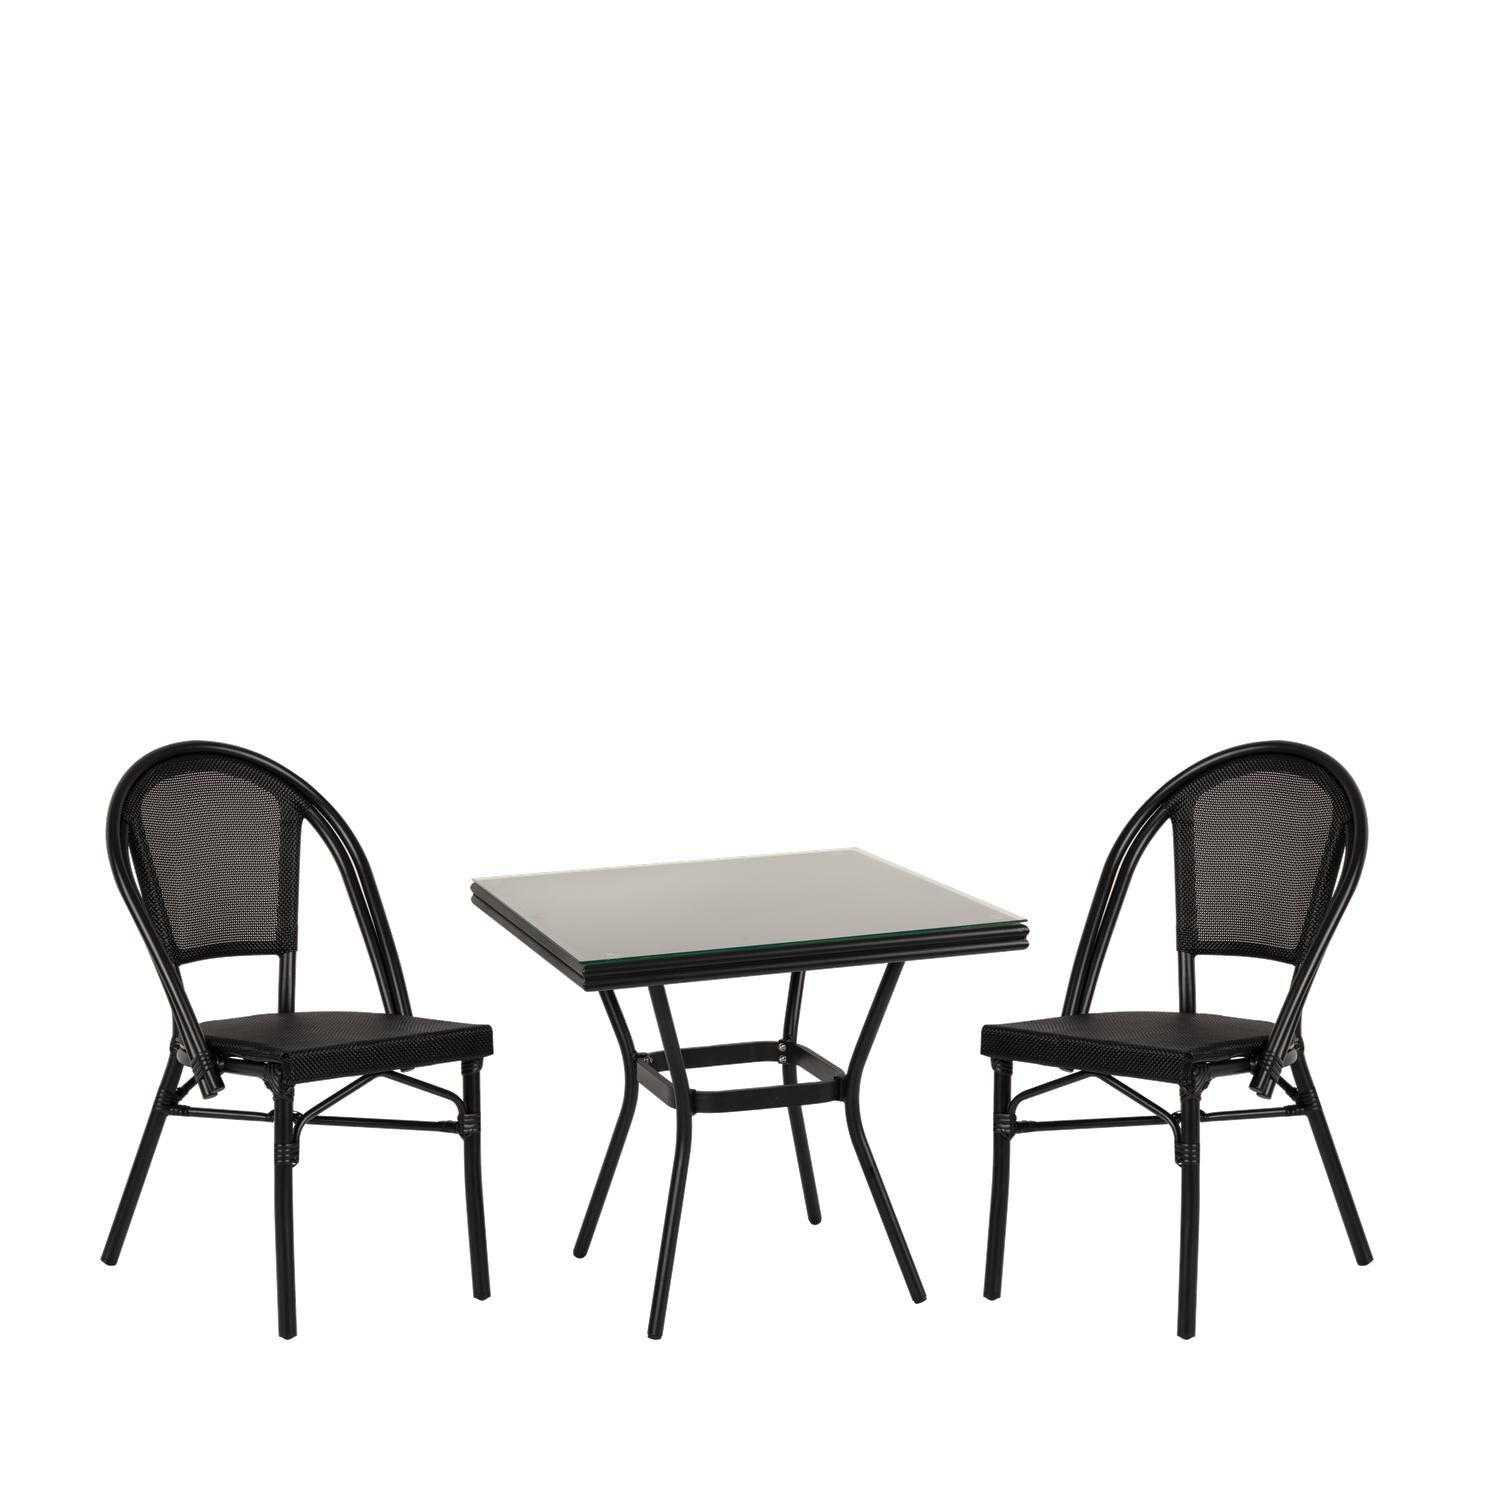 ANGOLA Garden Dining Set Black Aluminum/Glass With 2 Chairs 14990236